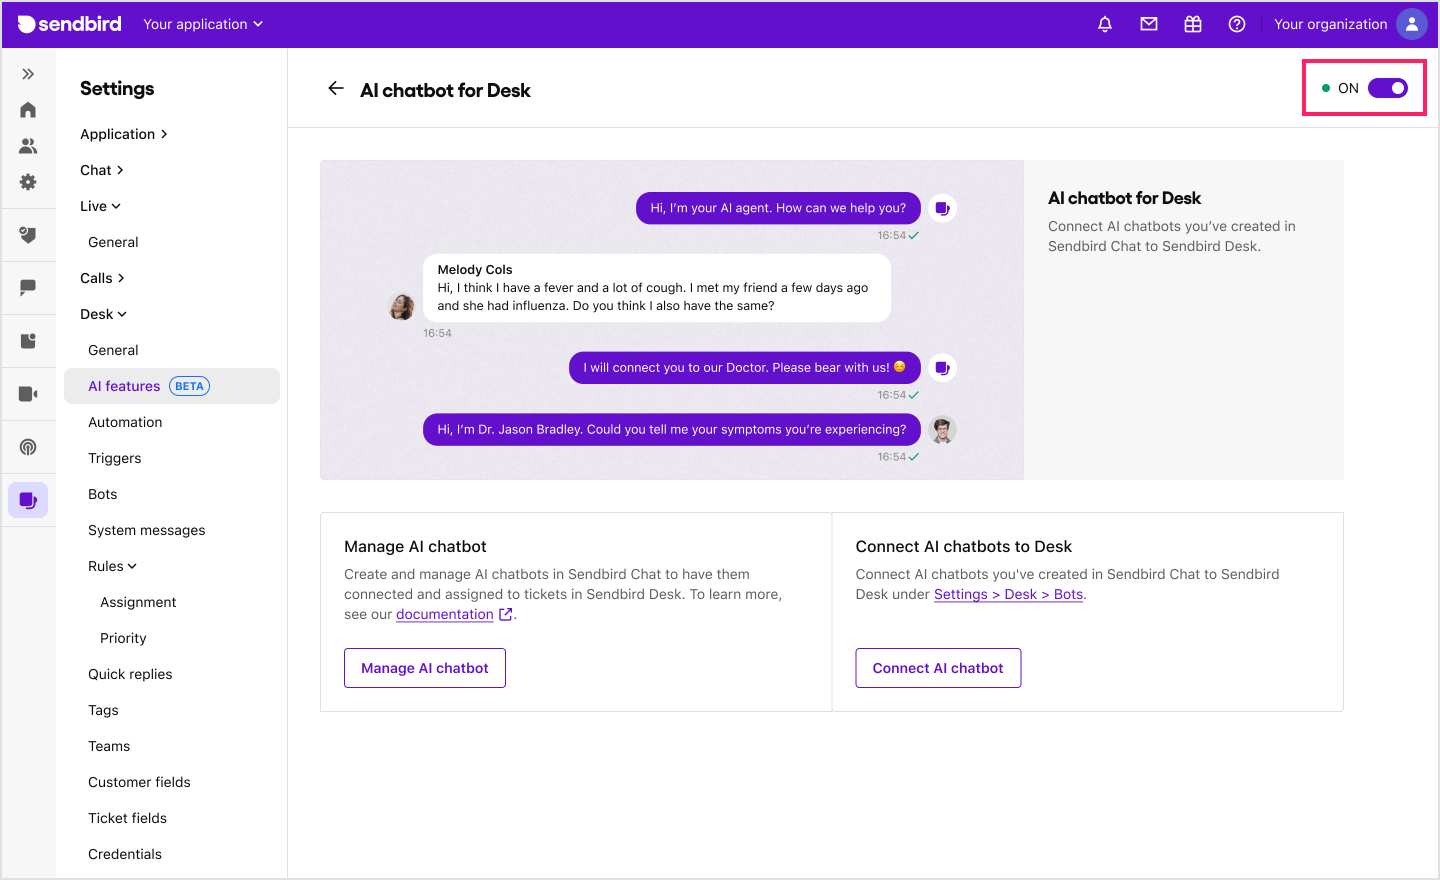 image|Turning on the AI chatbot for Desk under Settings > Desk > AI features on Sendbird Dashboard.